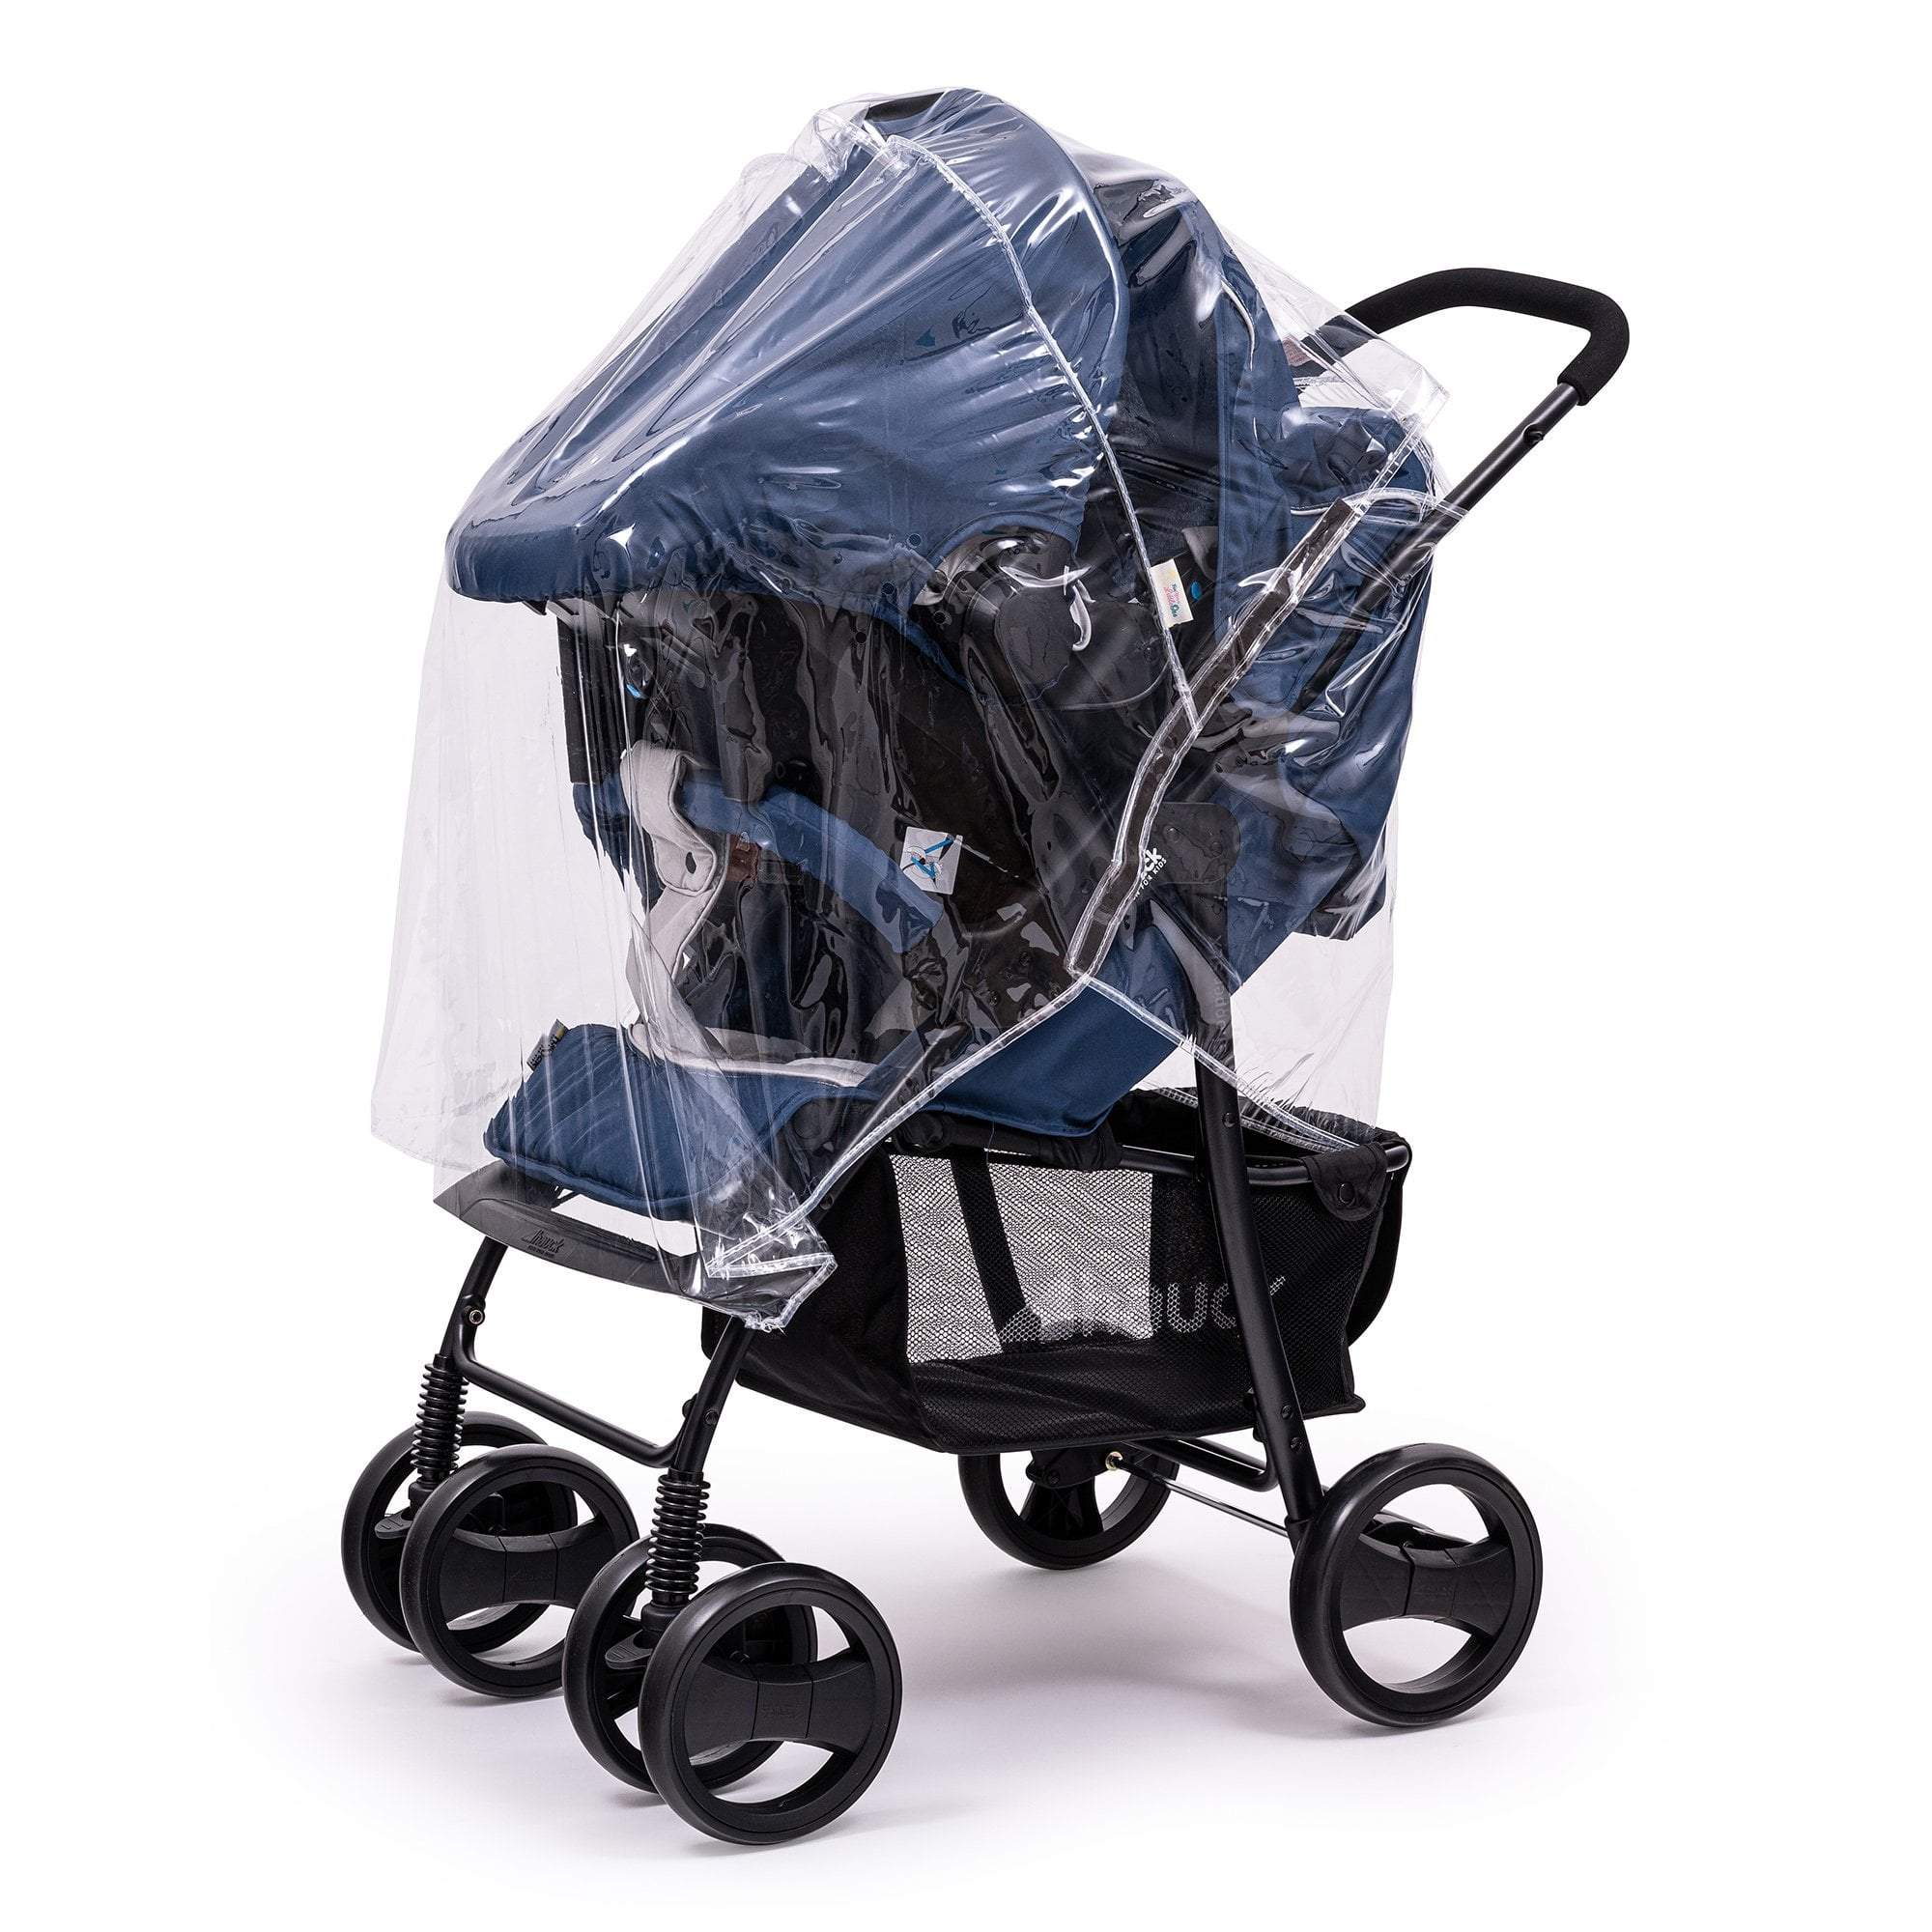 Travel System Raincover Compatible with Babybus - Fits All Models - For Your Little One